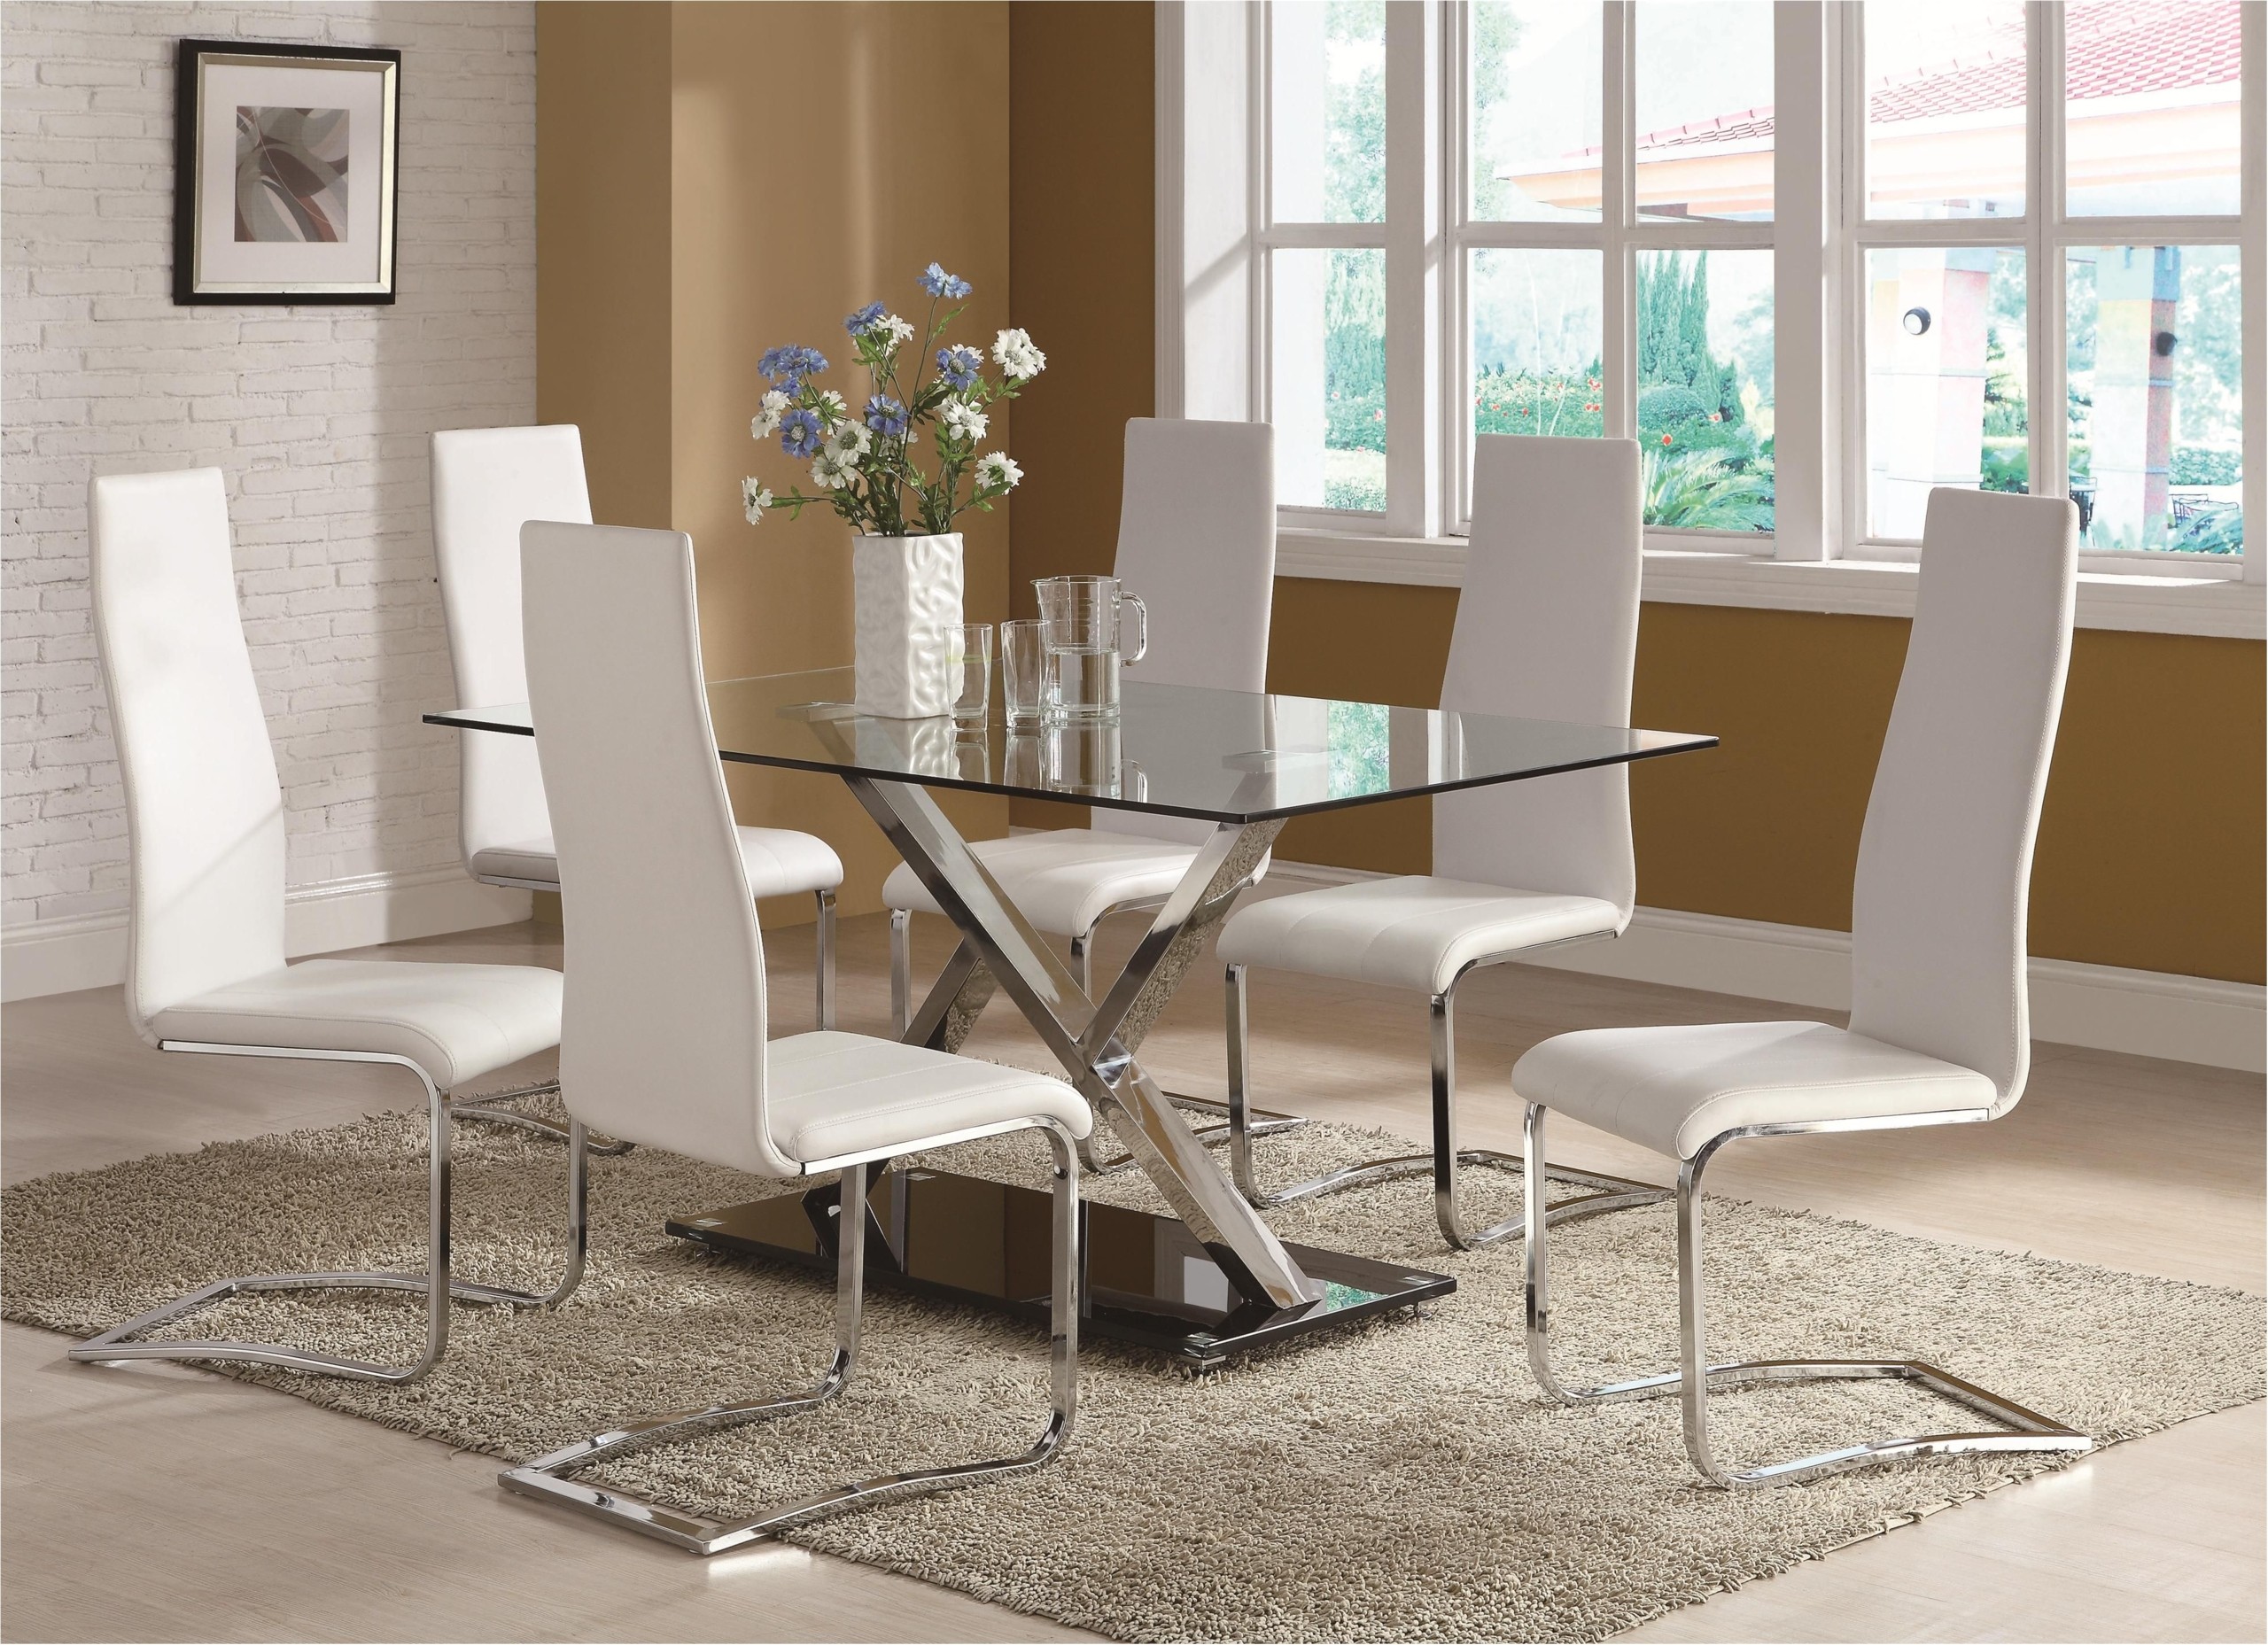 Xy dining table with chrome base modern faux leather dining